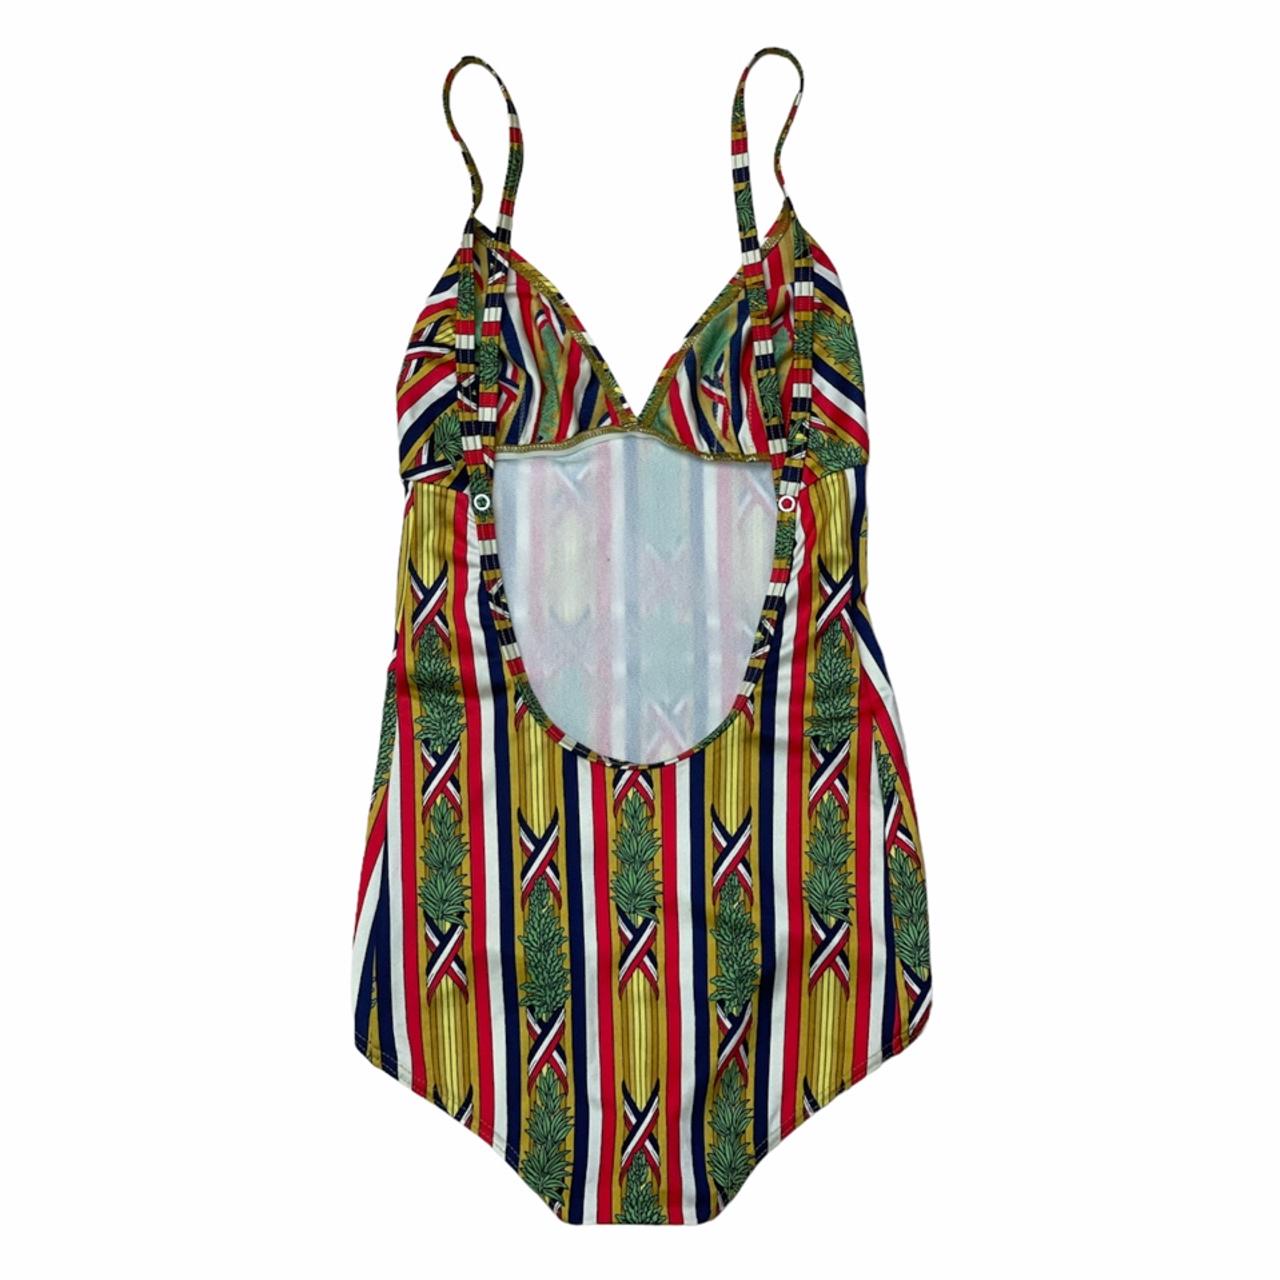 Product Image 3 - Vintage Hermes Swimsuit

Size 42 (small